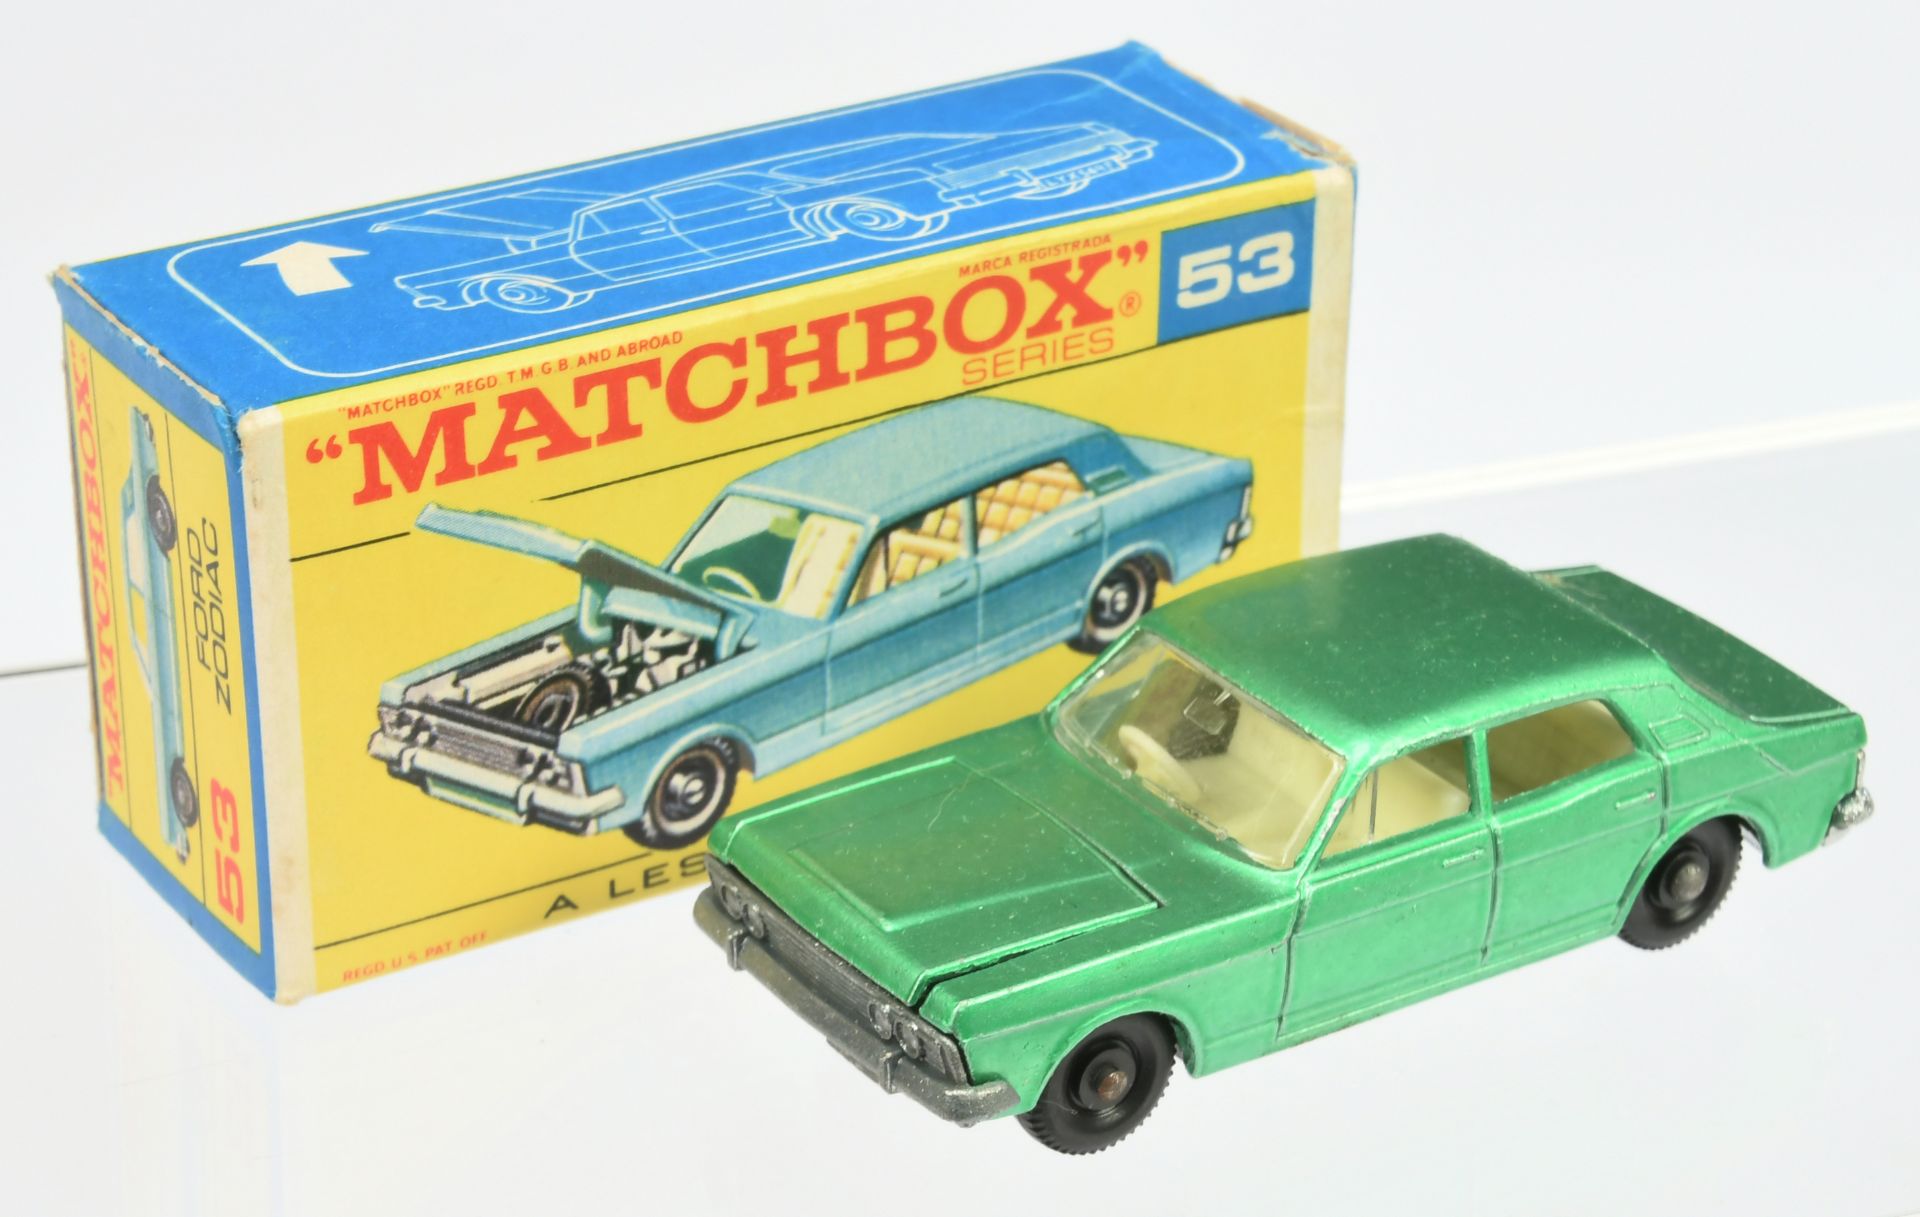 Matchbox Regular Wheels group (1) 8e Ford Mustang - white - box has tape removal mark (2) 53c For... - Image 2 of 4